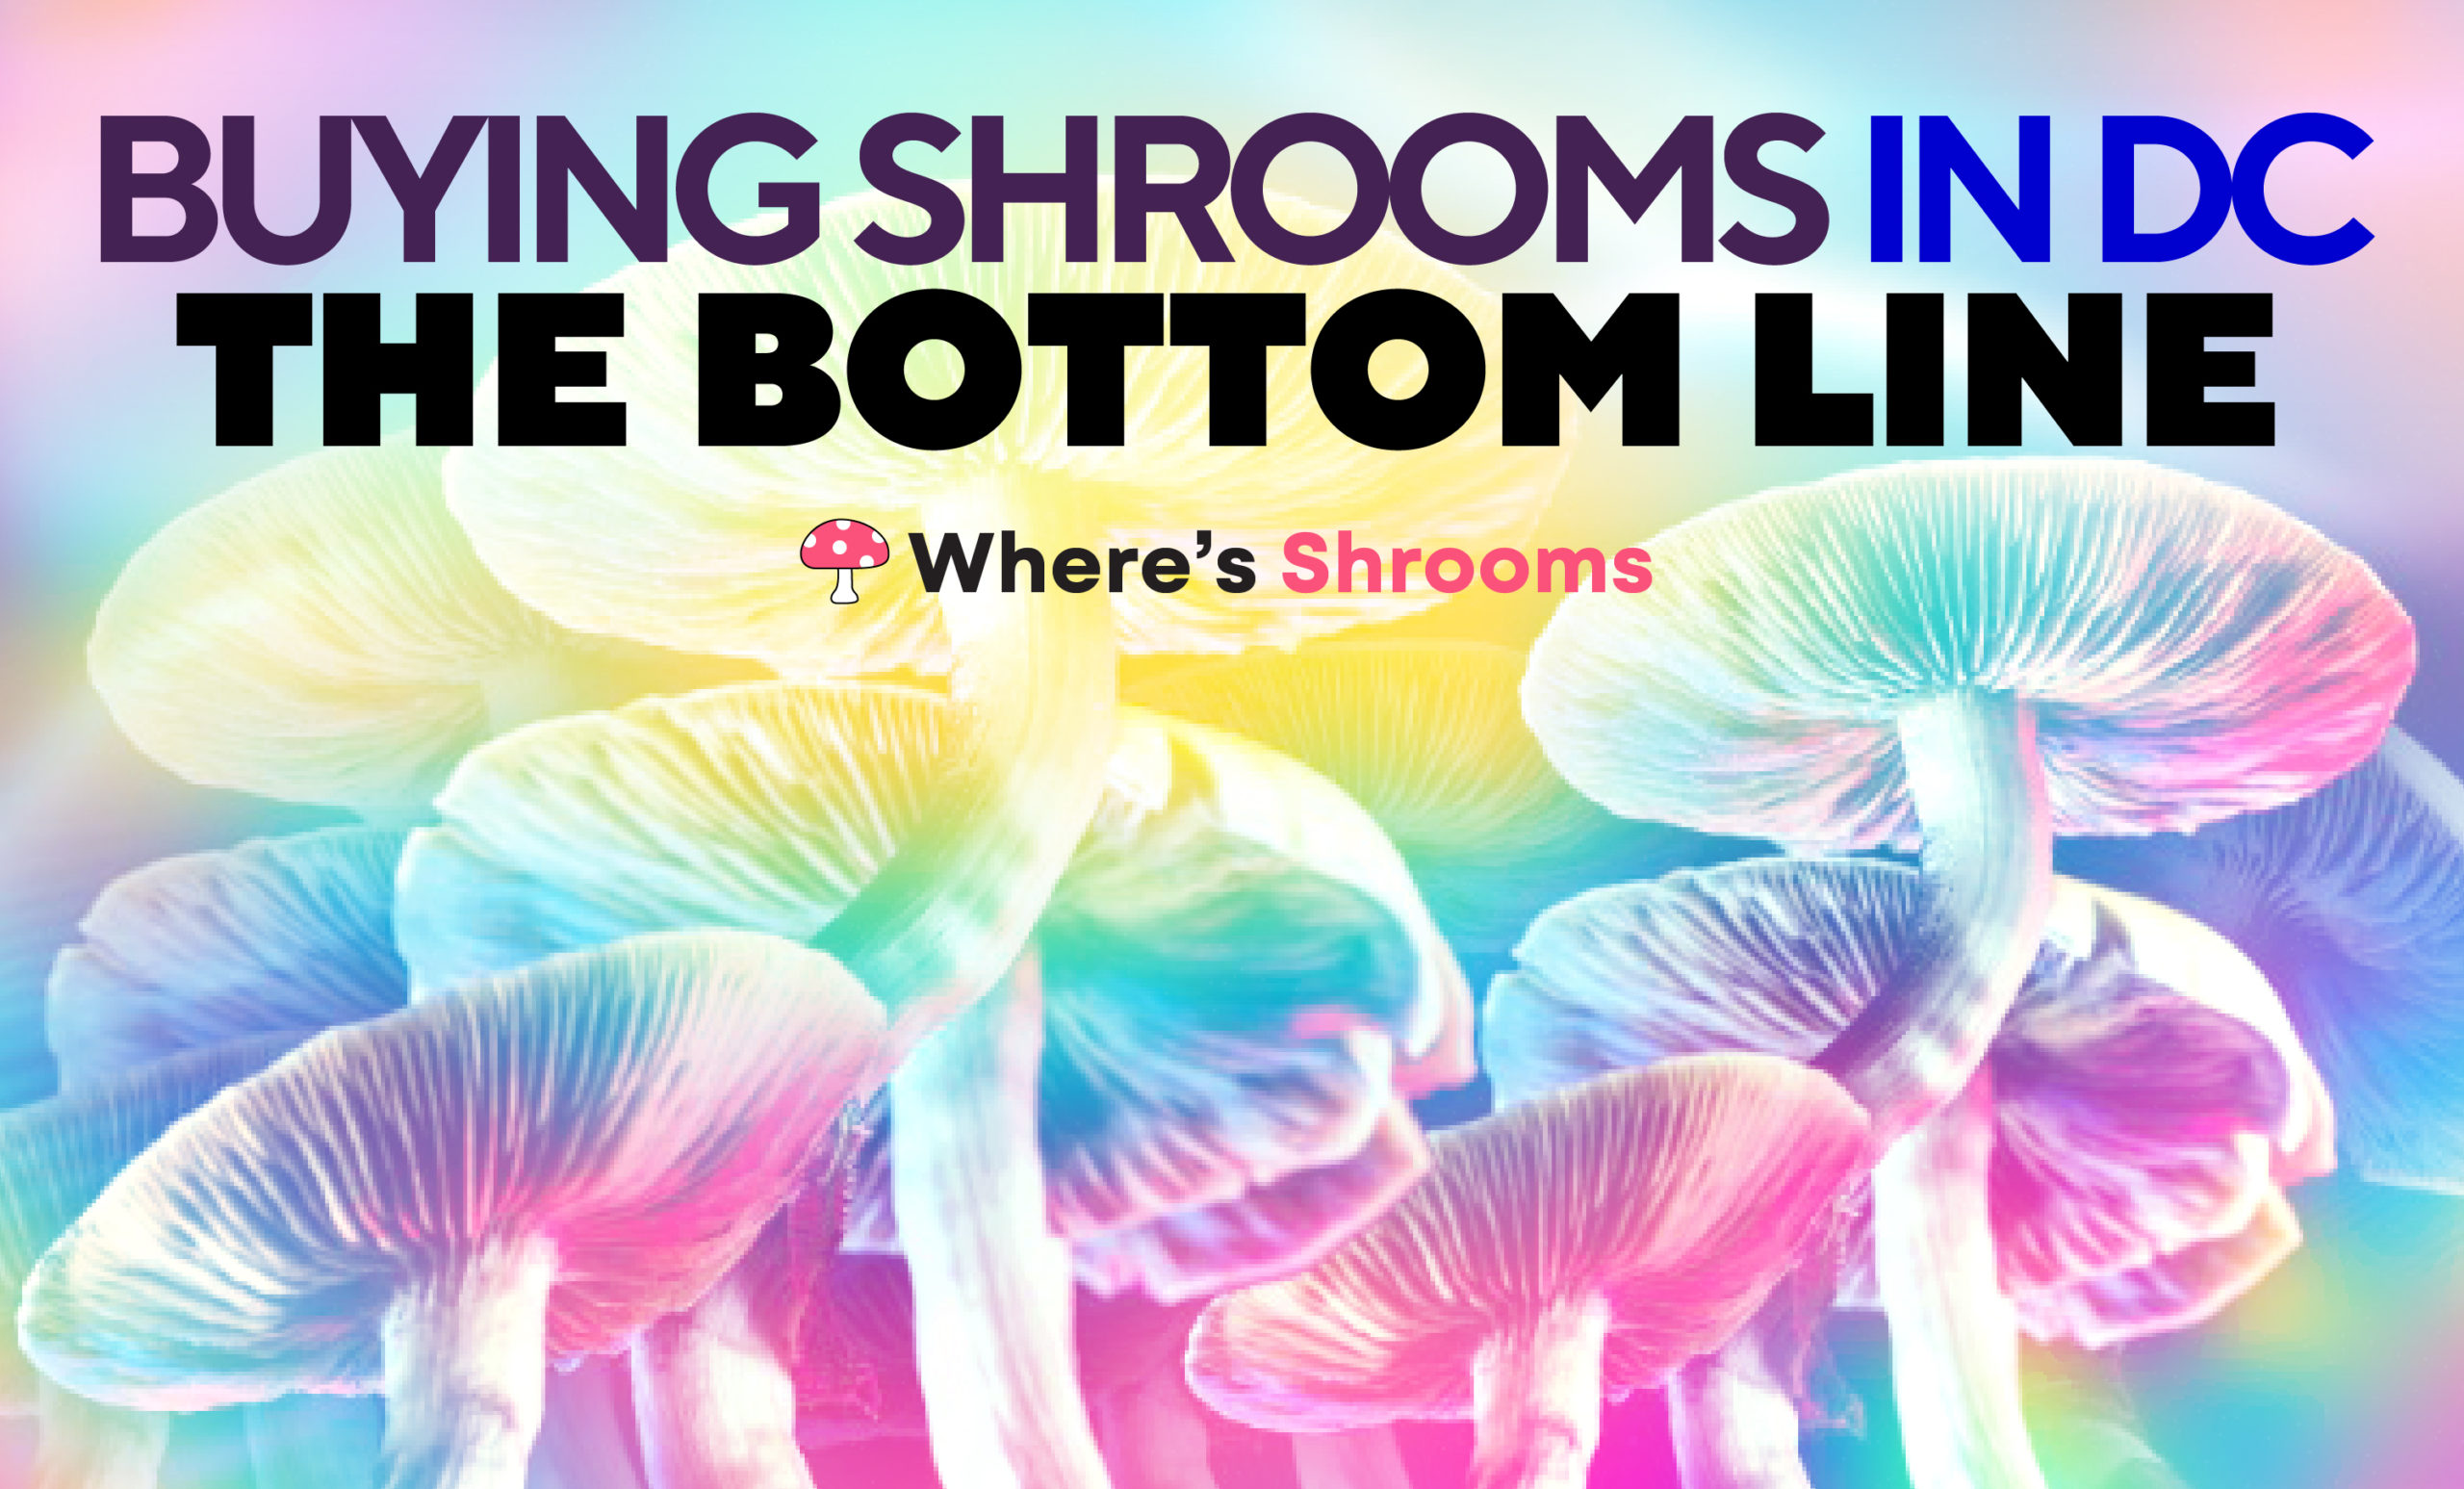 buying shrooms in dc - the bottom line